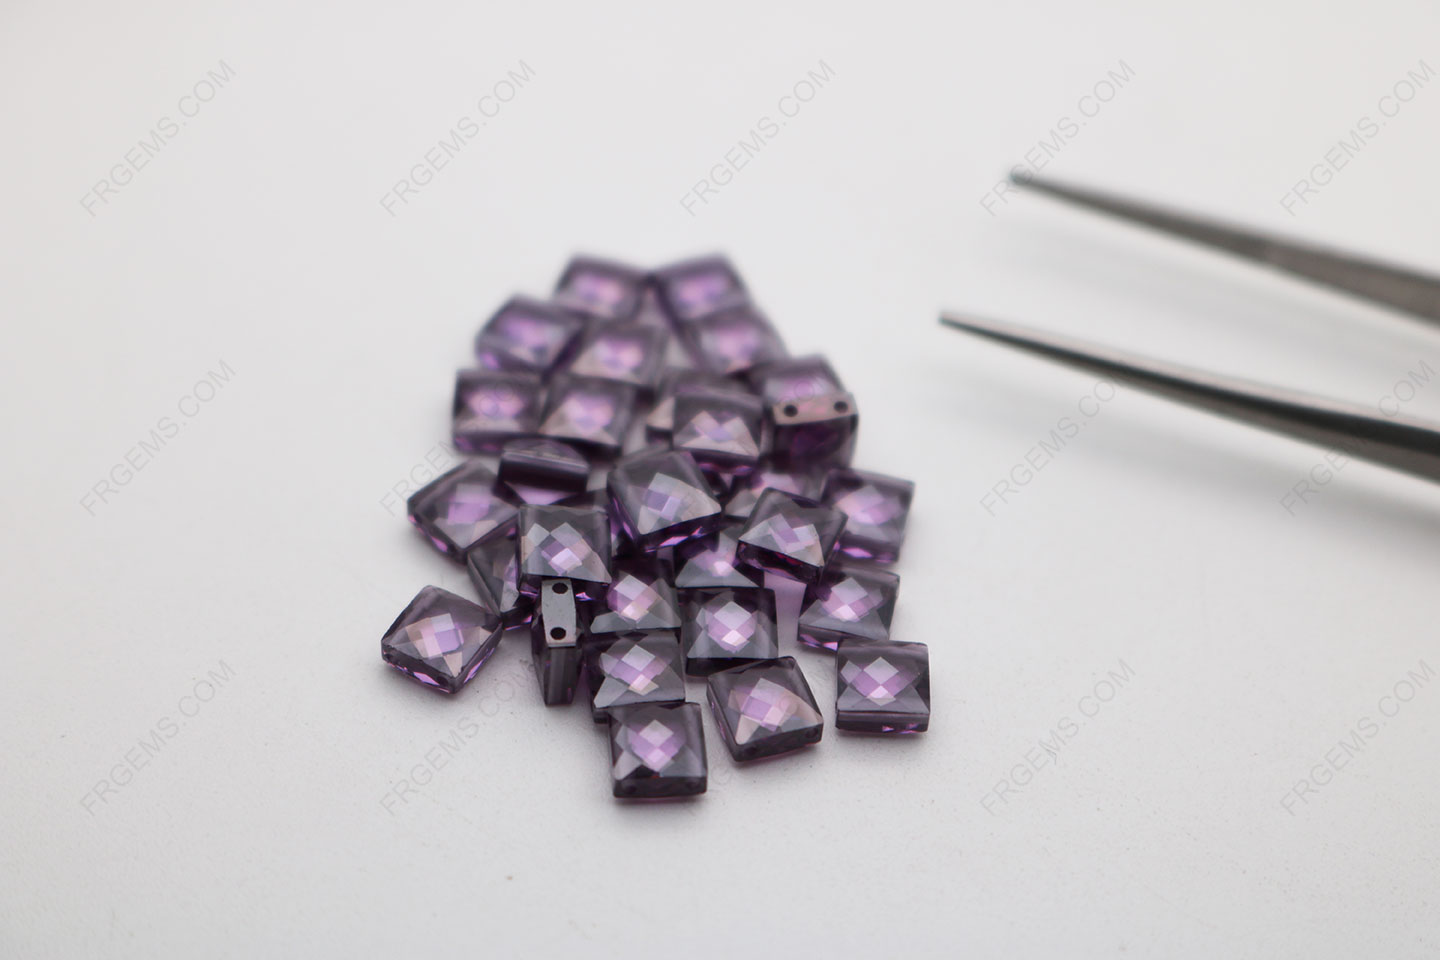 Cubic Zirconia Amethyst Color Square Double checkerboard faceted cut 5x5mm stones CZ10 IMG_2785